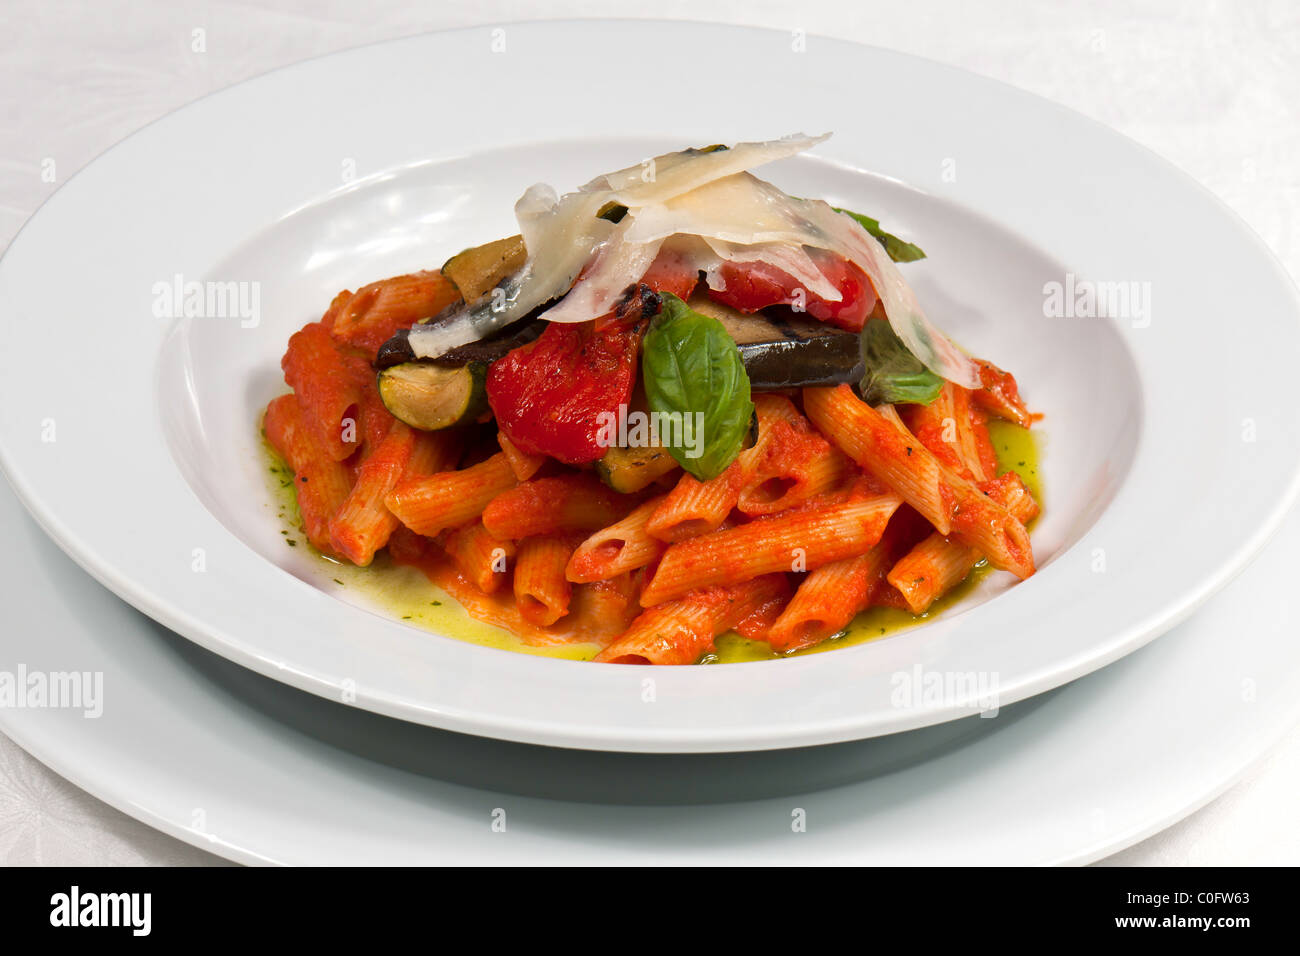 Chef's Presentation dish - Vegetable moussaka with mixed salad leaves. Stock Photo